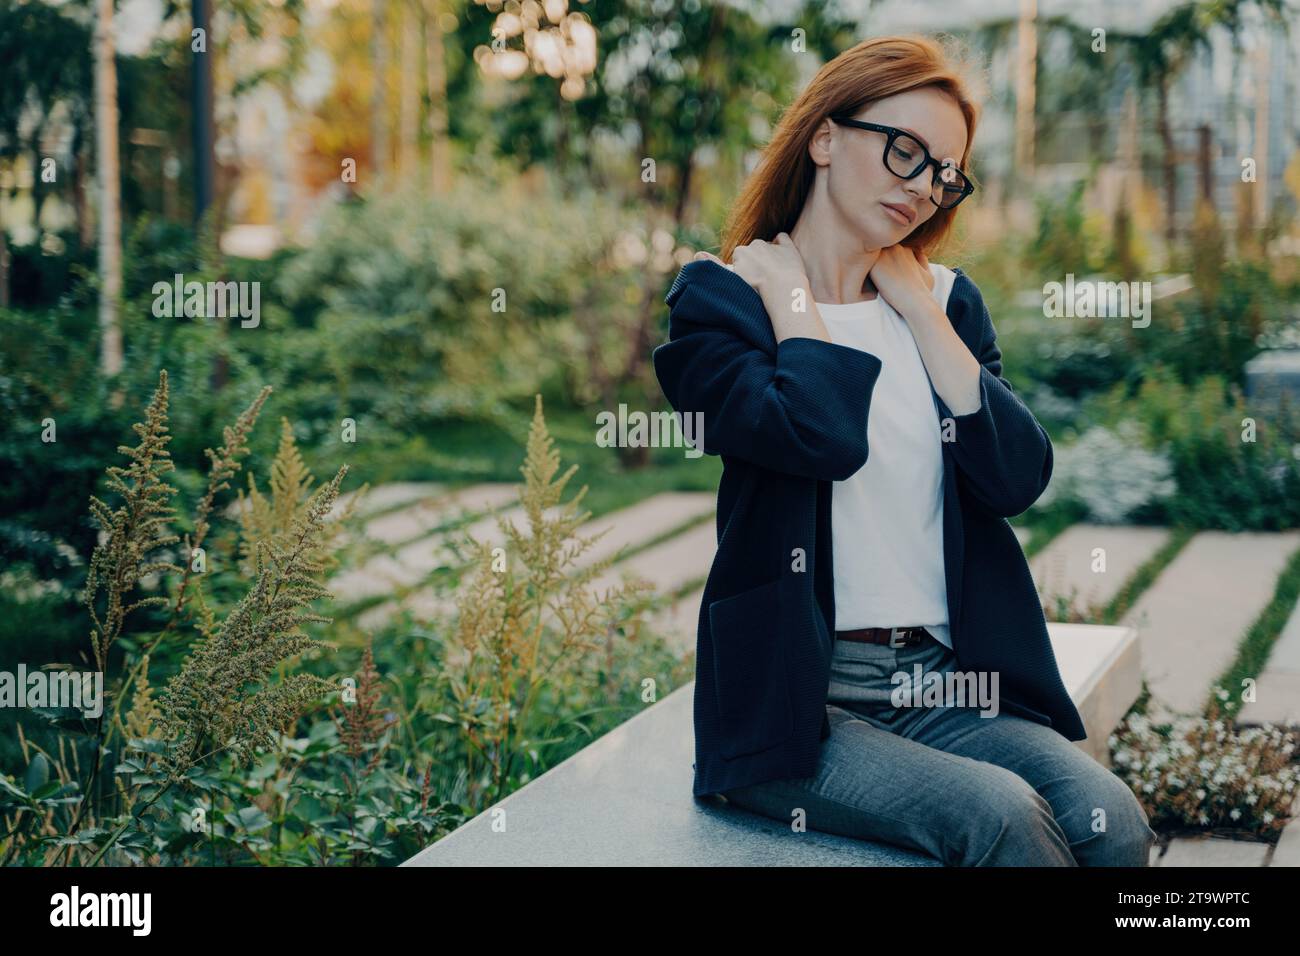 Businesswoman in a park taking a break from work, massaging her neck, amidst greenery Stock Photo